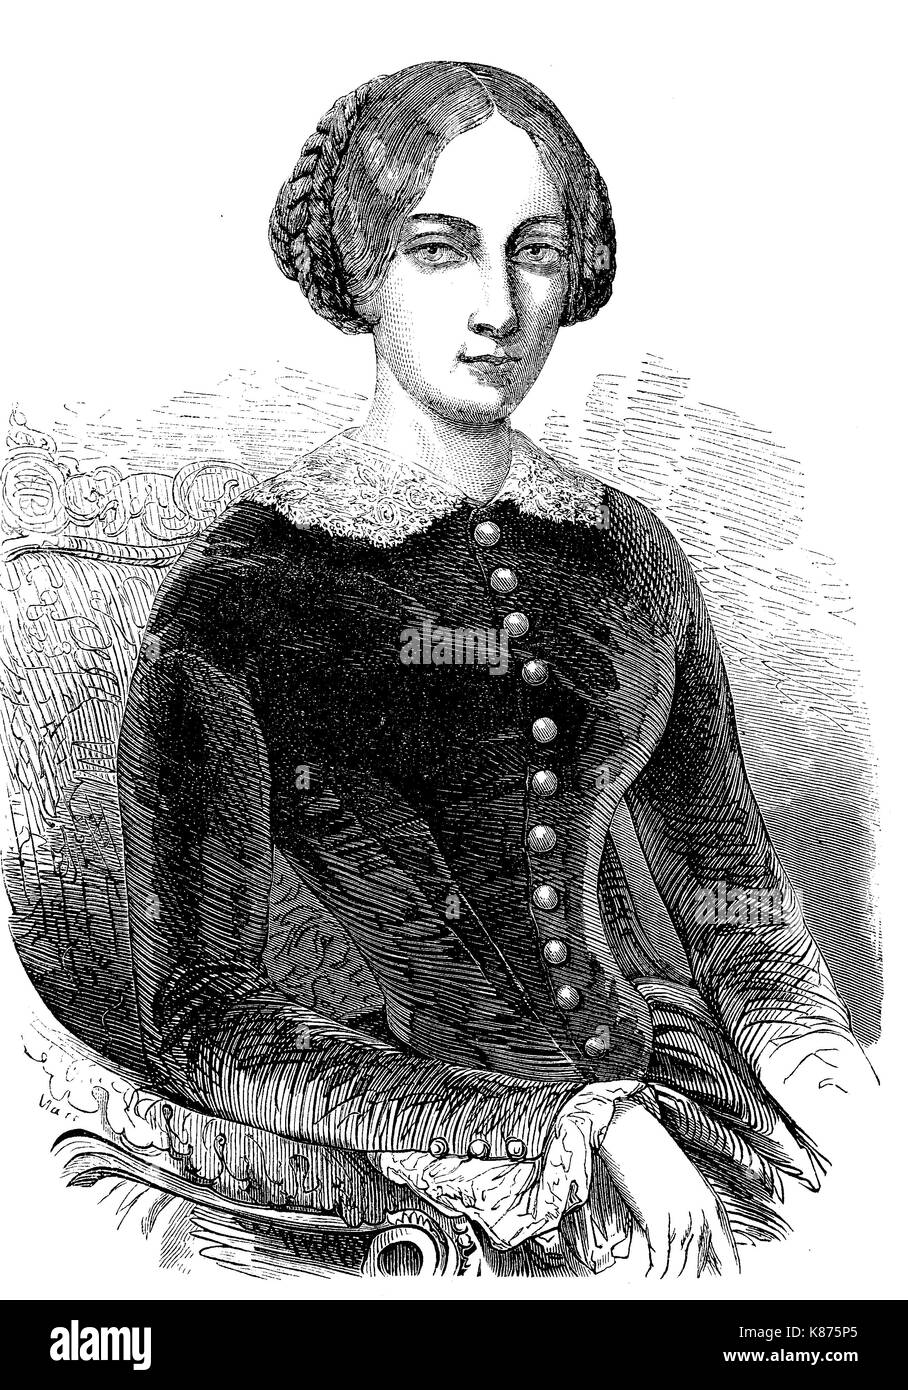 Maria Alexandrovna, born Princess Marie of Hesse and by Rhine, 1824 - 1880, was Empress consort of Russia as the first wife of Emperor Alexander II, Digital improved reproduction of an original woodprint from the 19th century Stock Photo